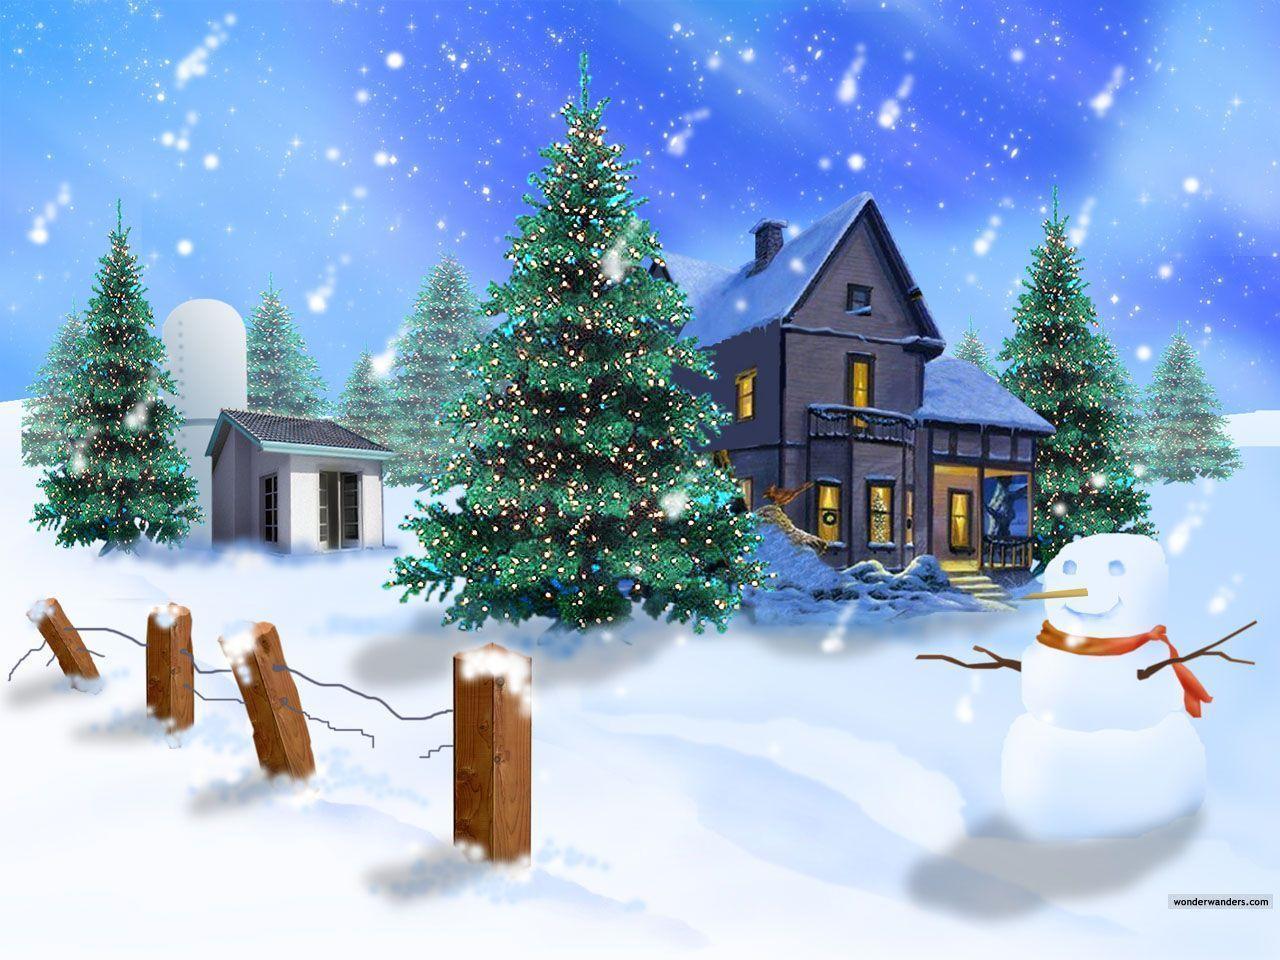 Free Christmas Wallpaper. coolstyle wallpaper